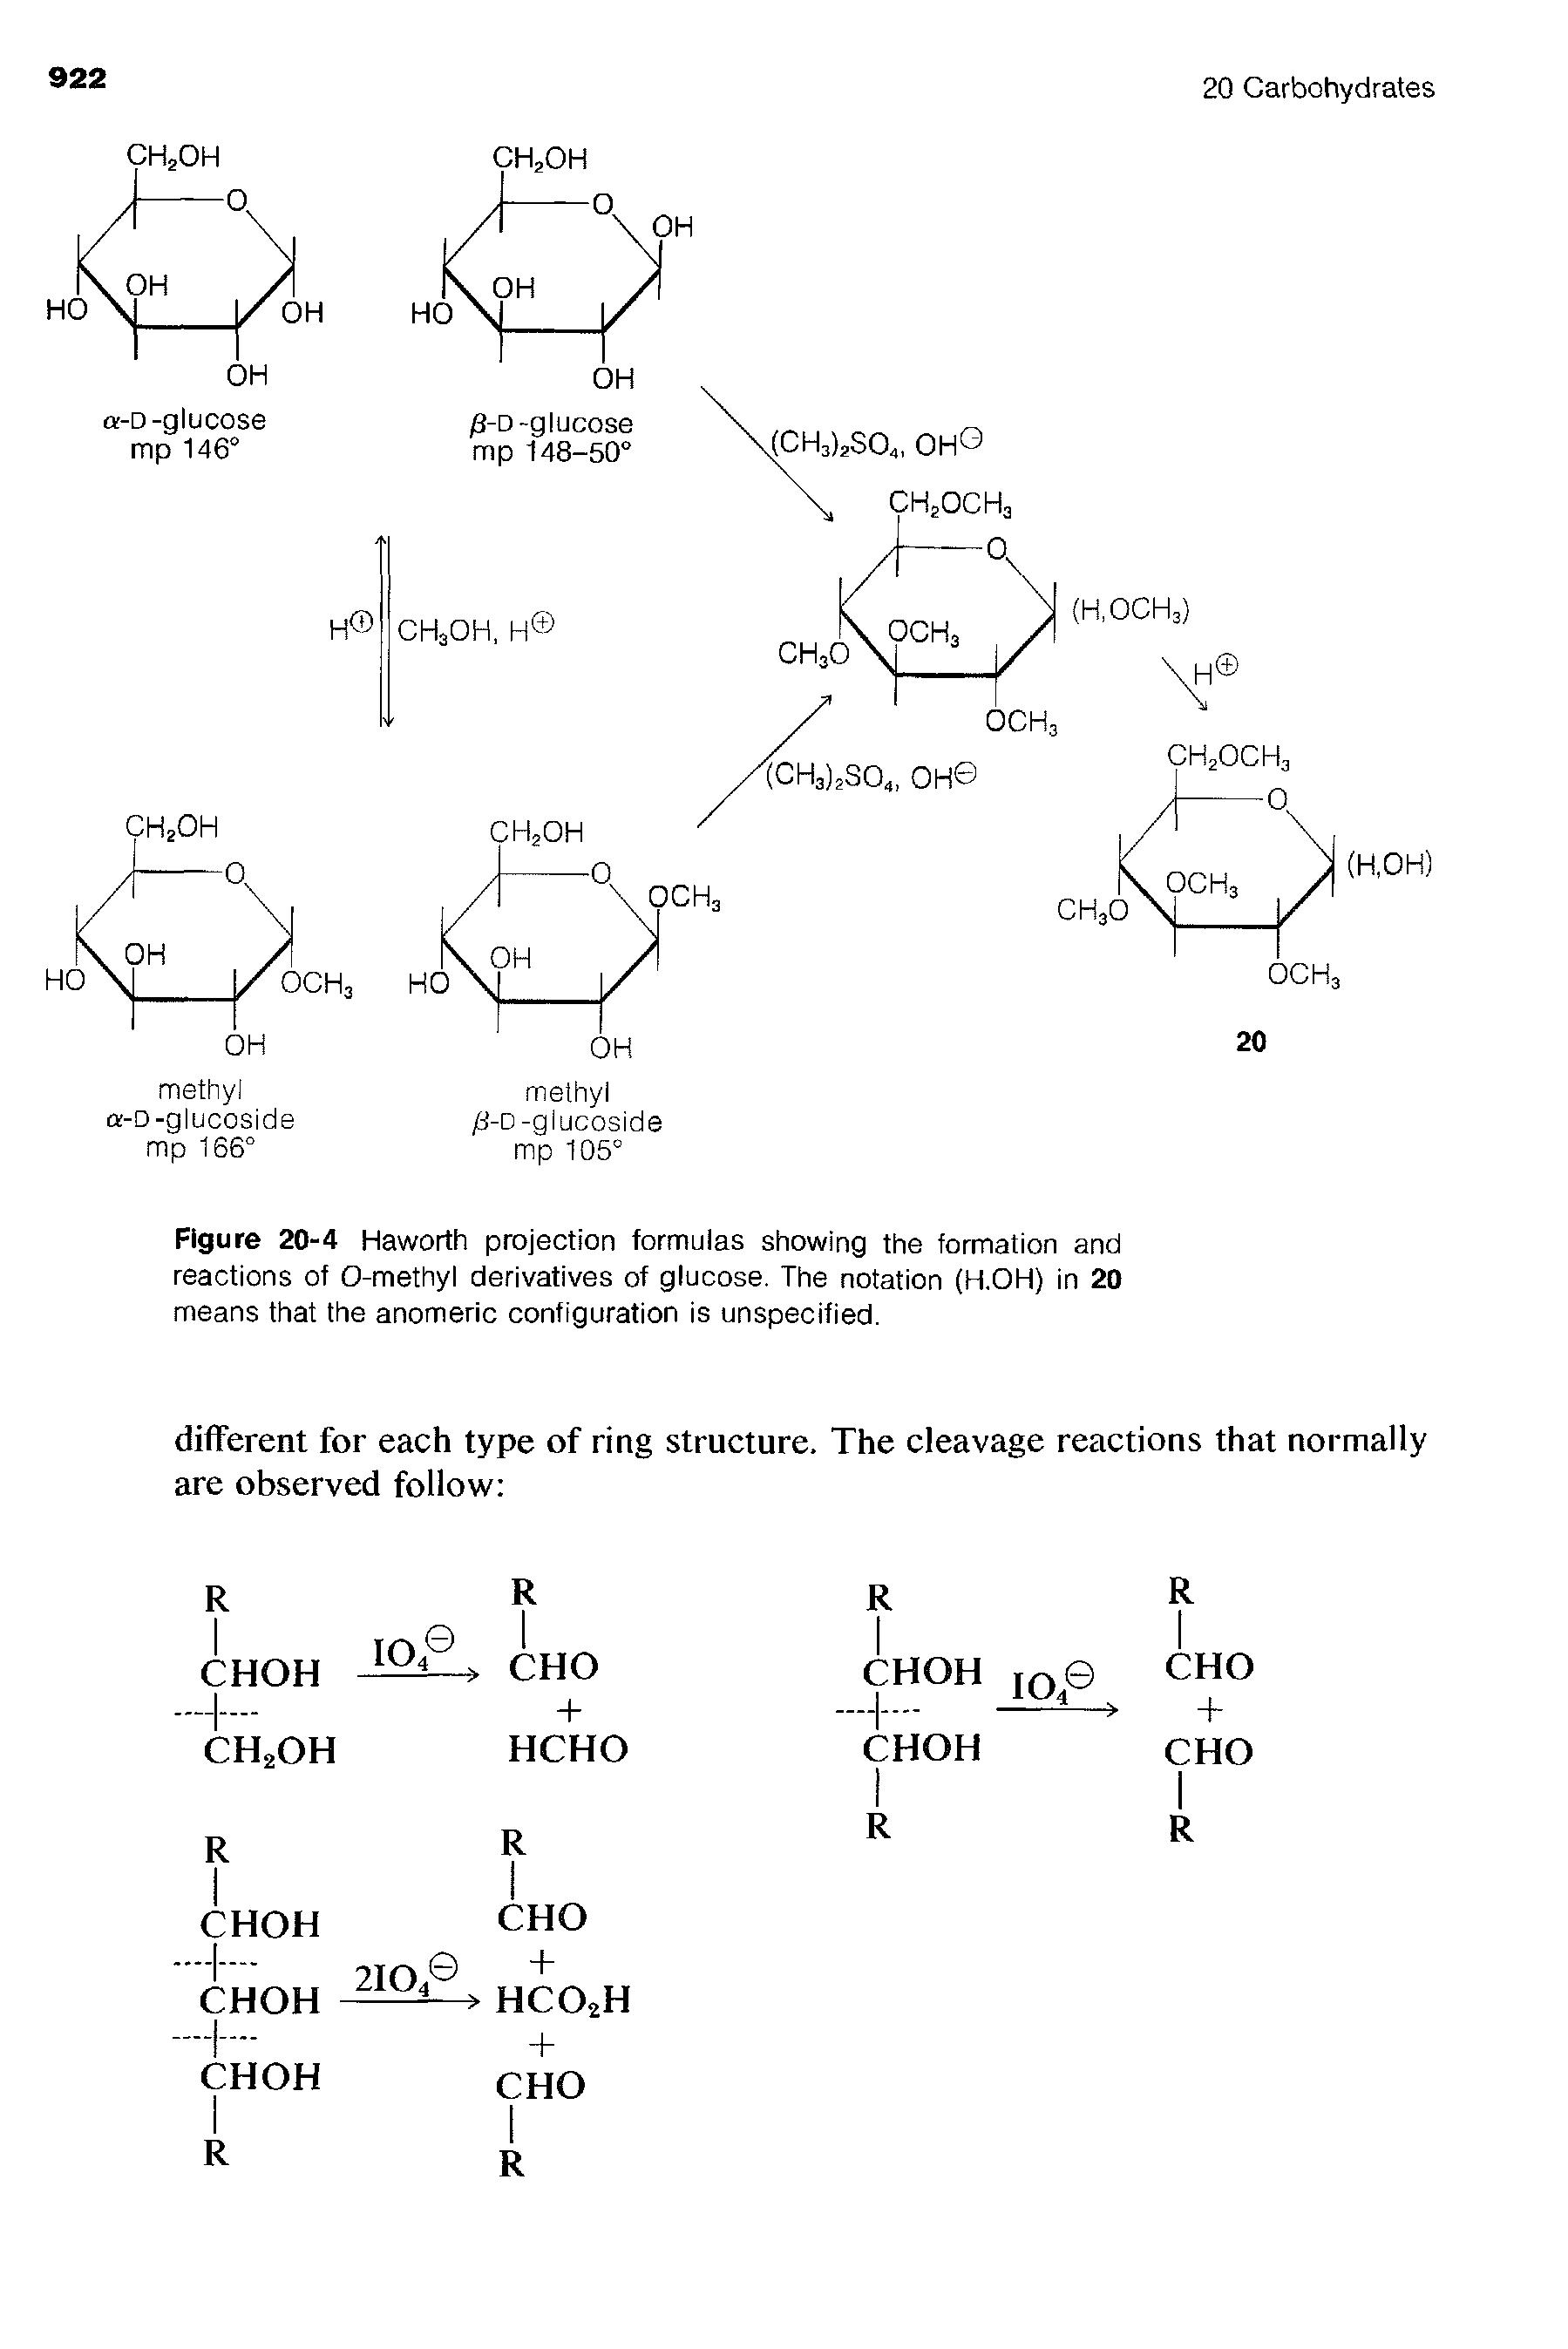 Figure 20-4 Haworth projection formulas showing the formation and reactions of O-methyl derivatives of glucose. The notation (H.OH) in 20 means that the anomeric configuration is unspecified.